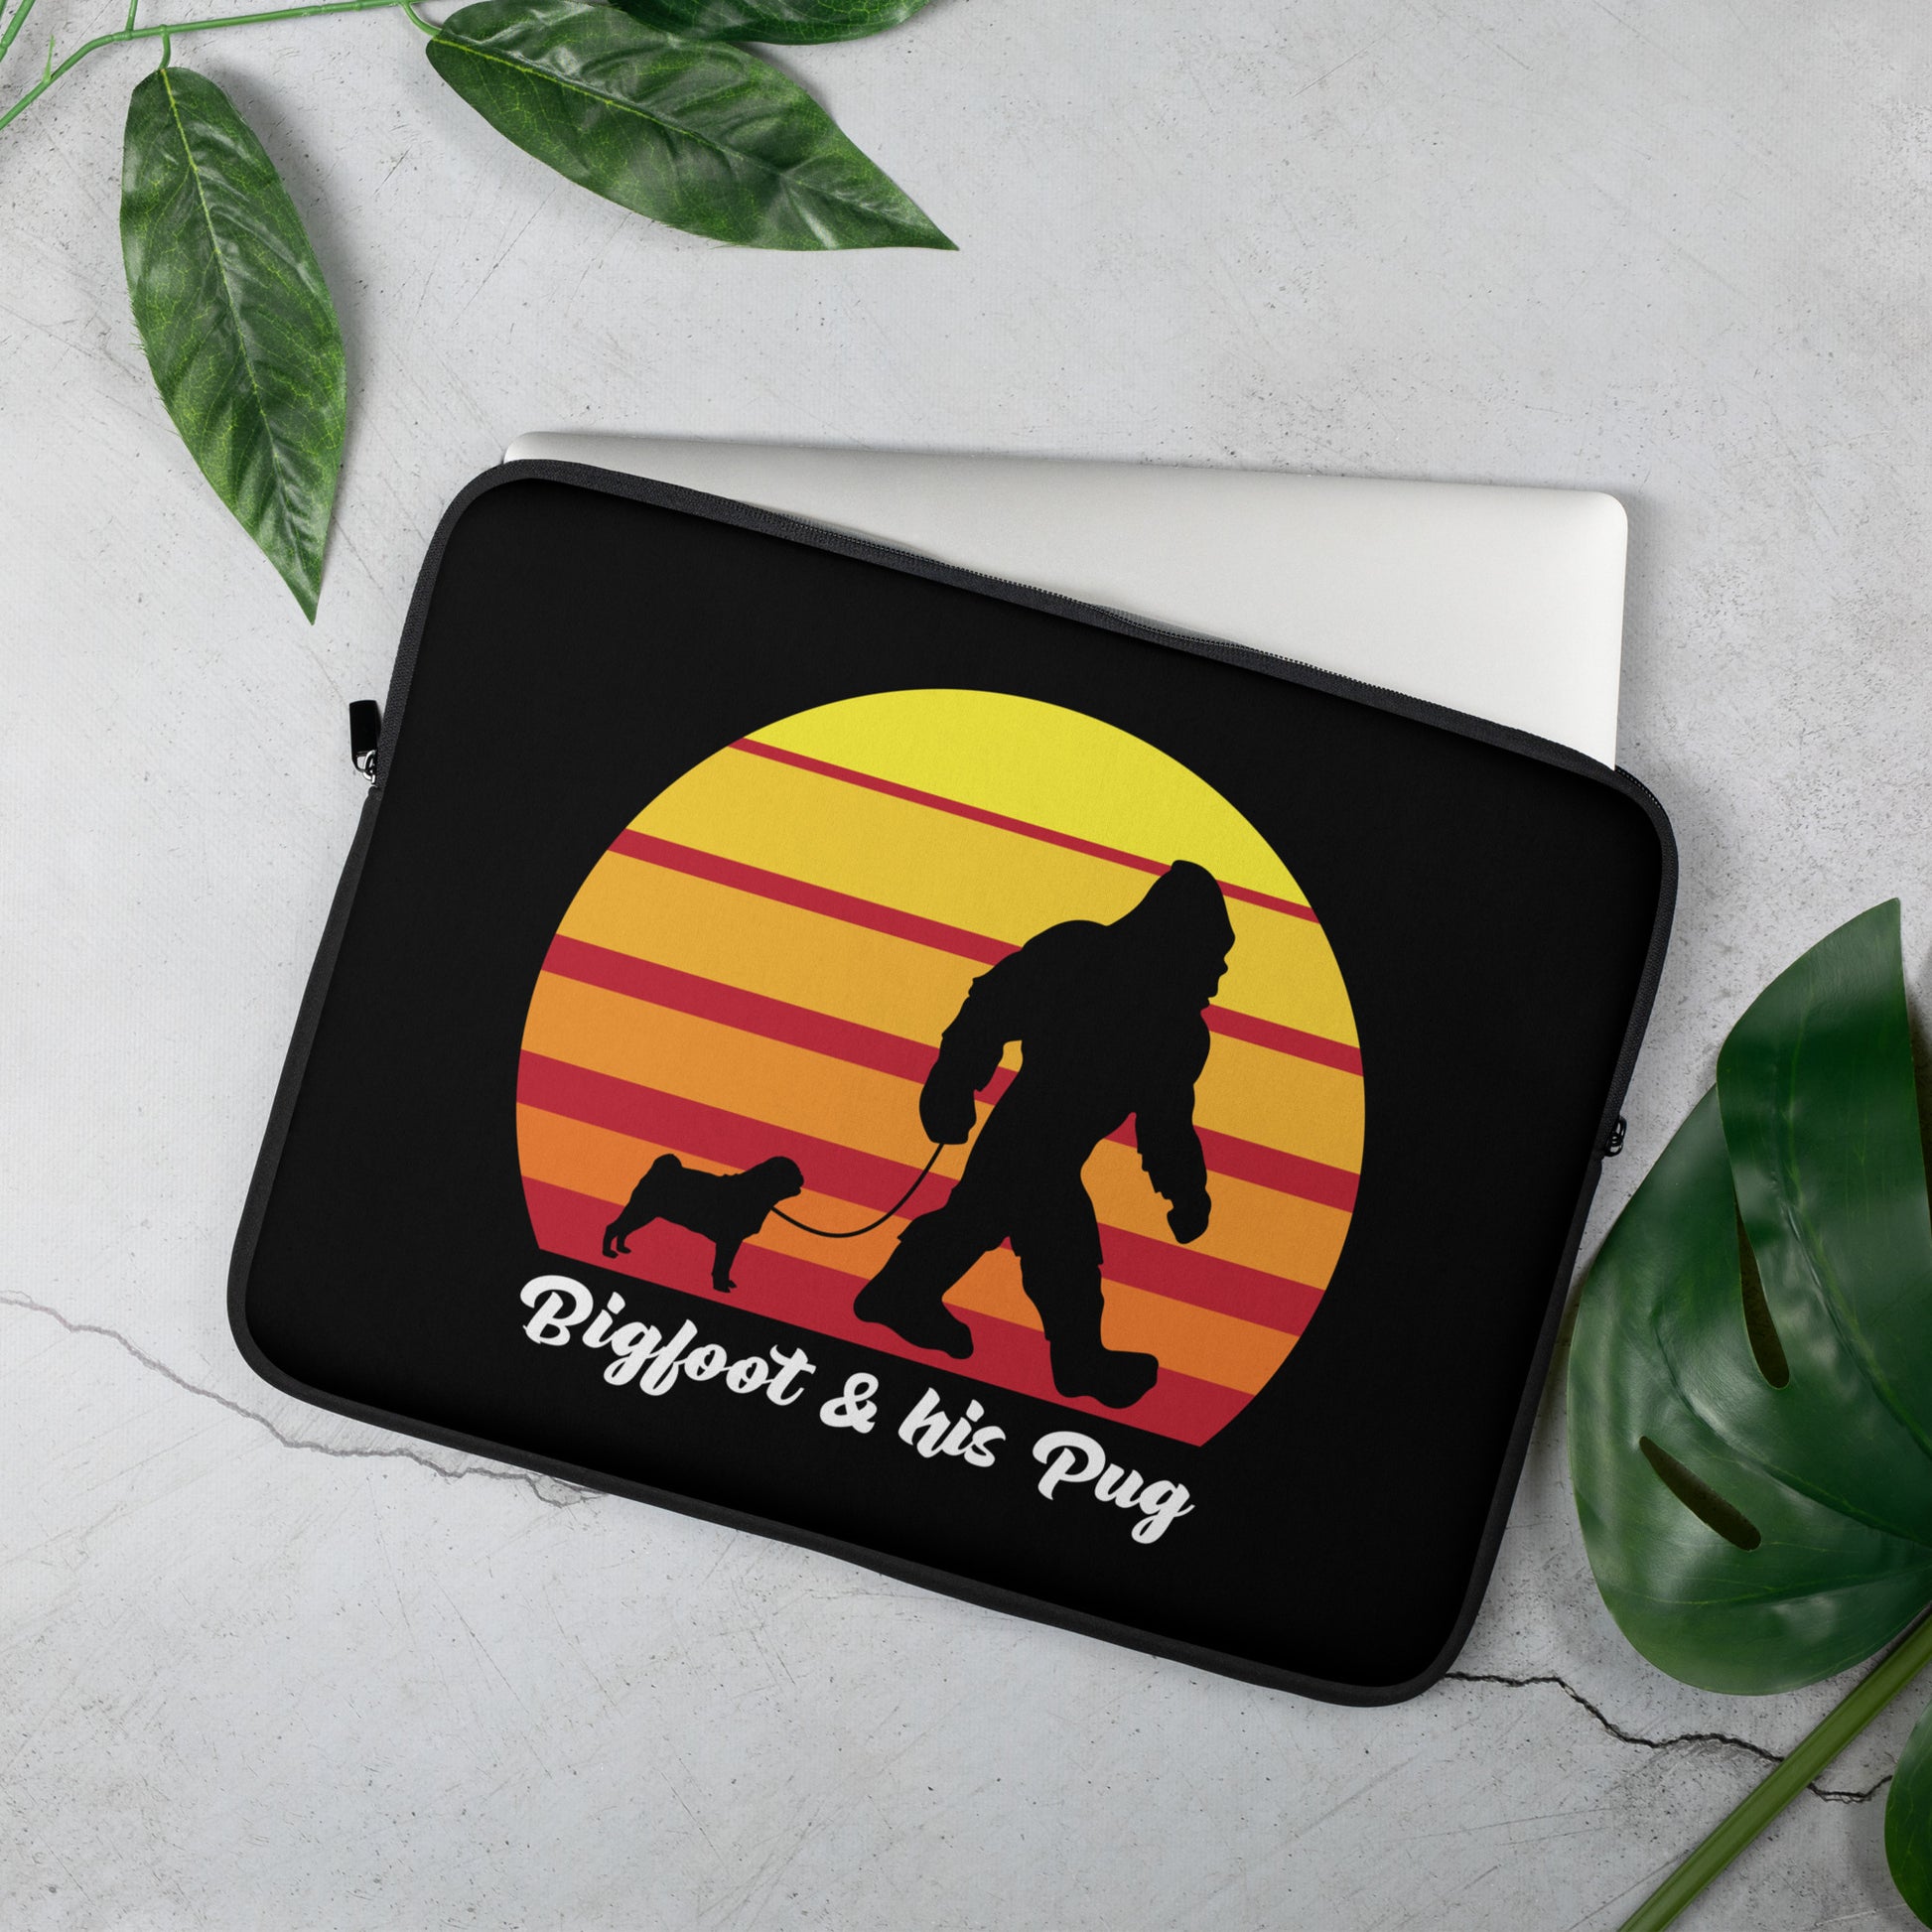 Bigfoot and his Pug Laptop Sleeve by Dog Artistry.